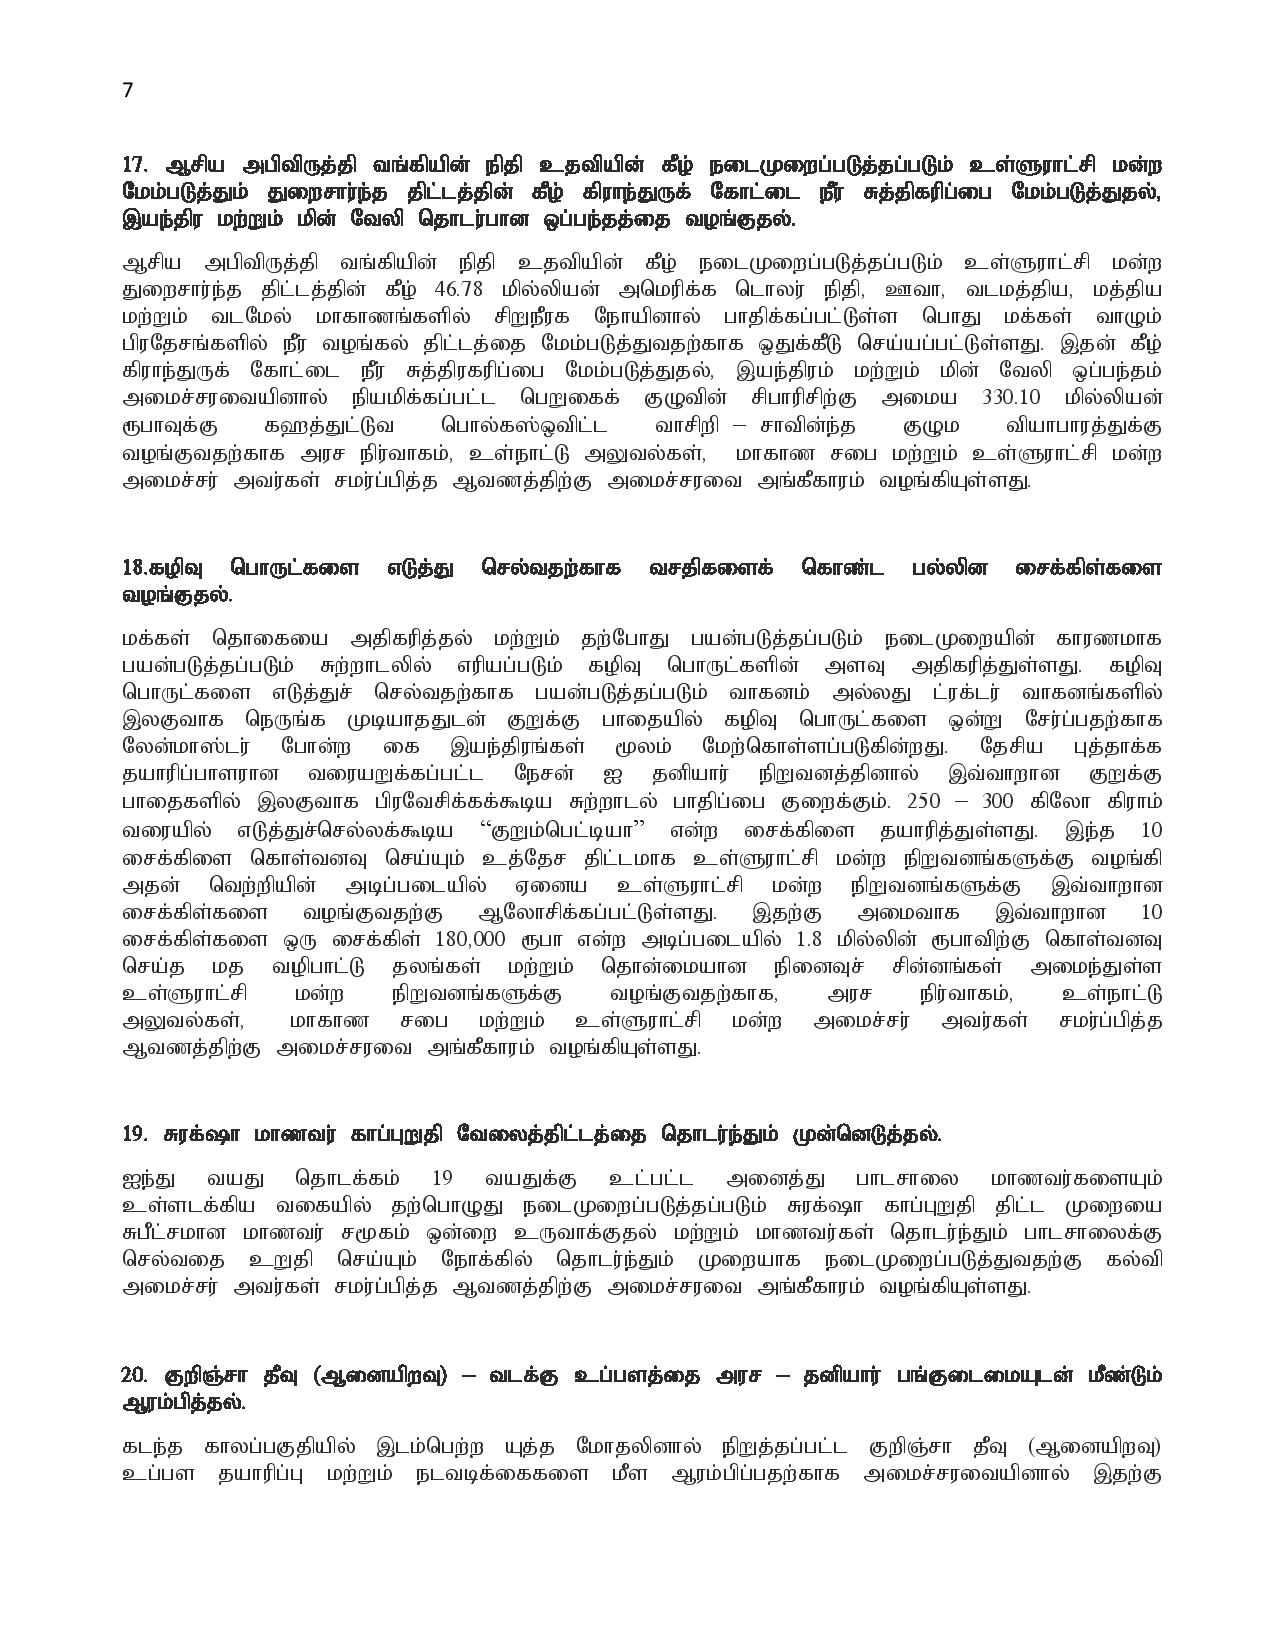 2020.02.27 cabinet tamil page 007